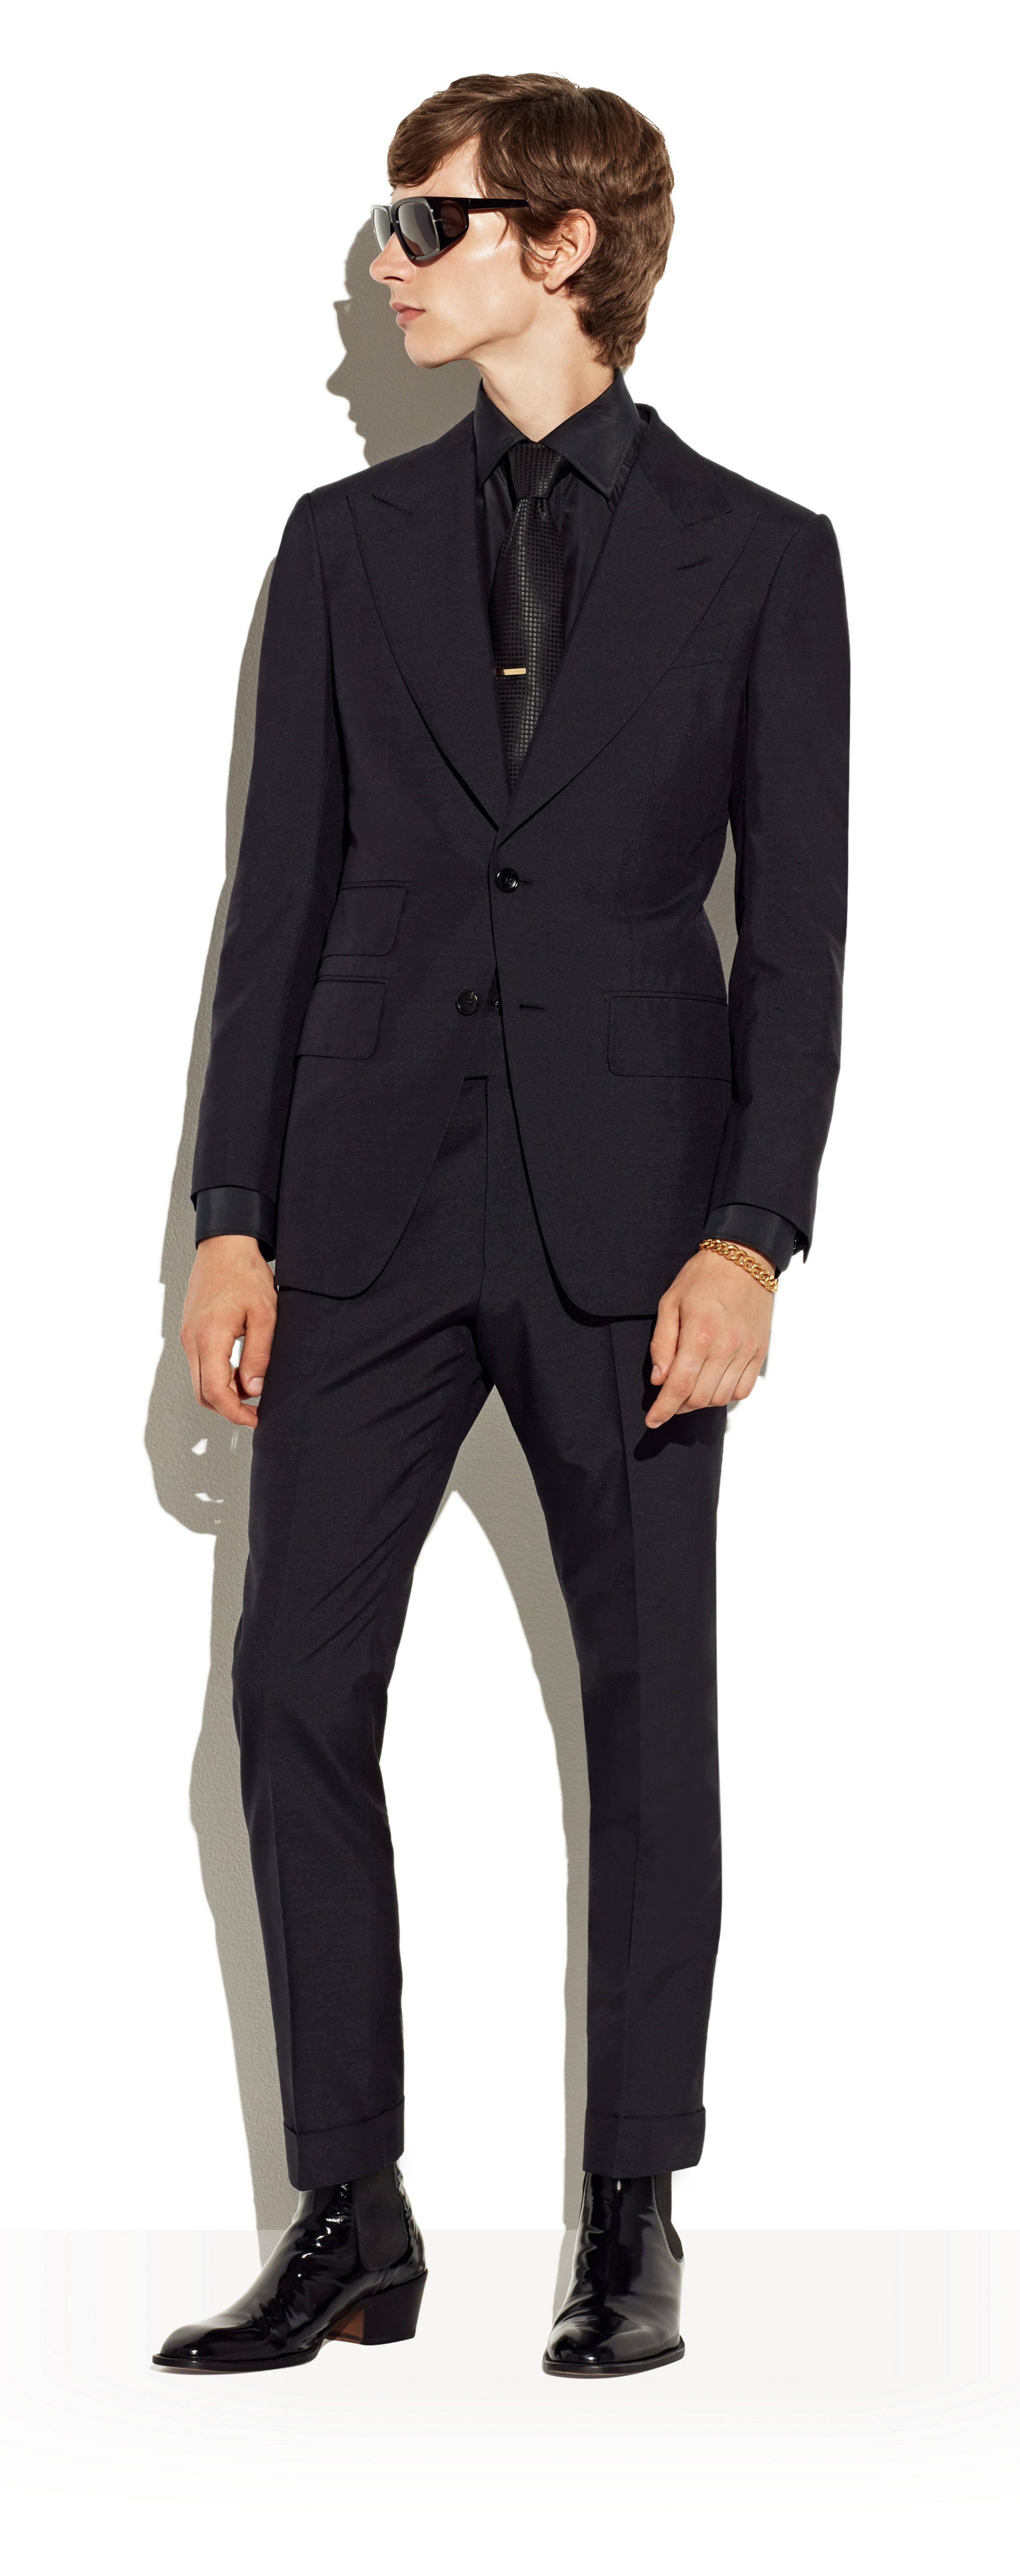 tom ford summer suits